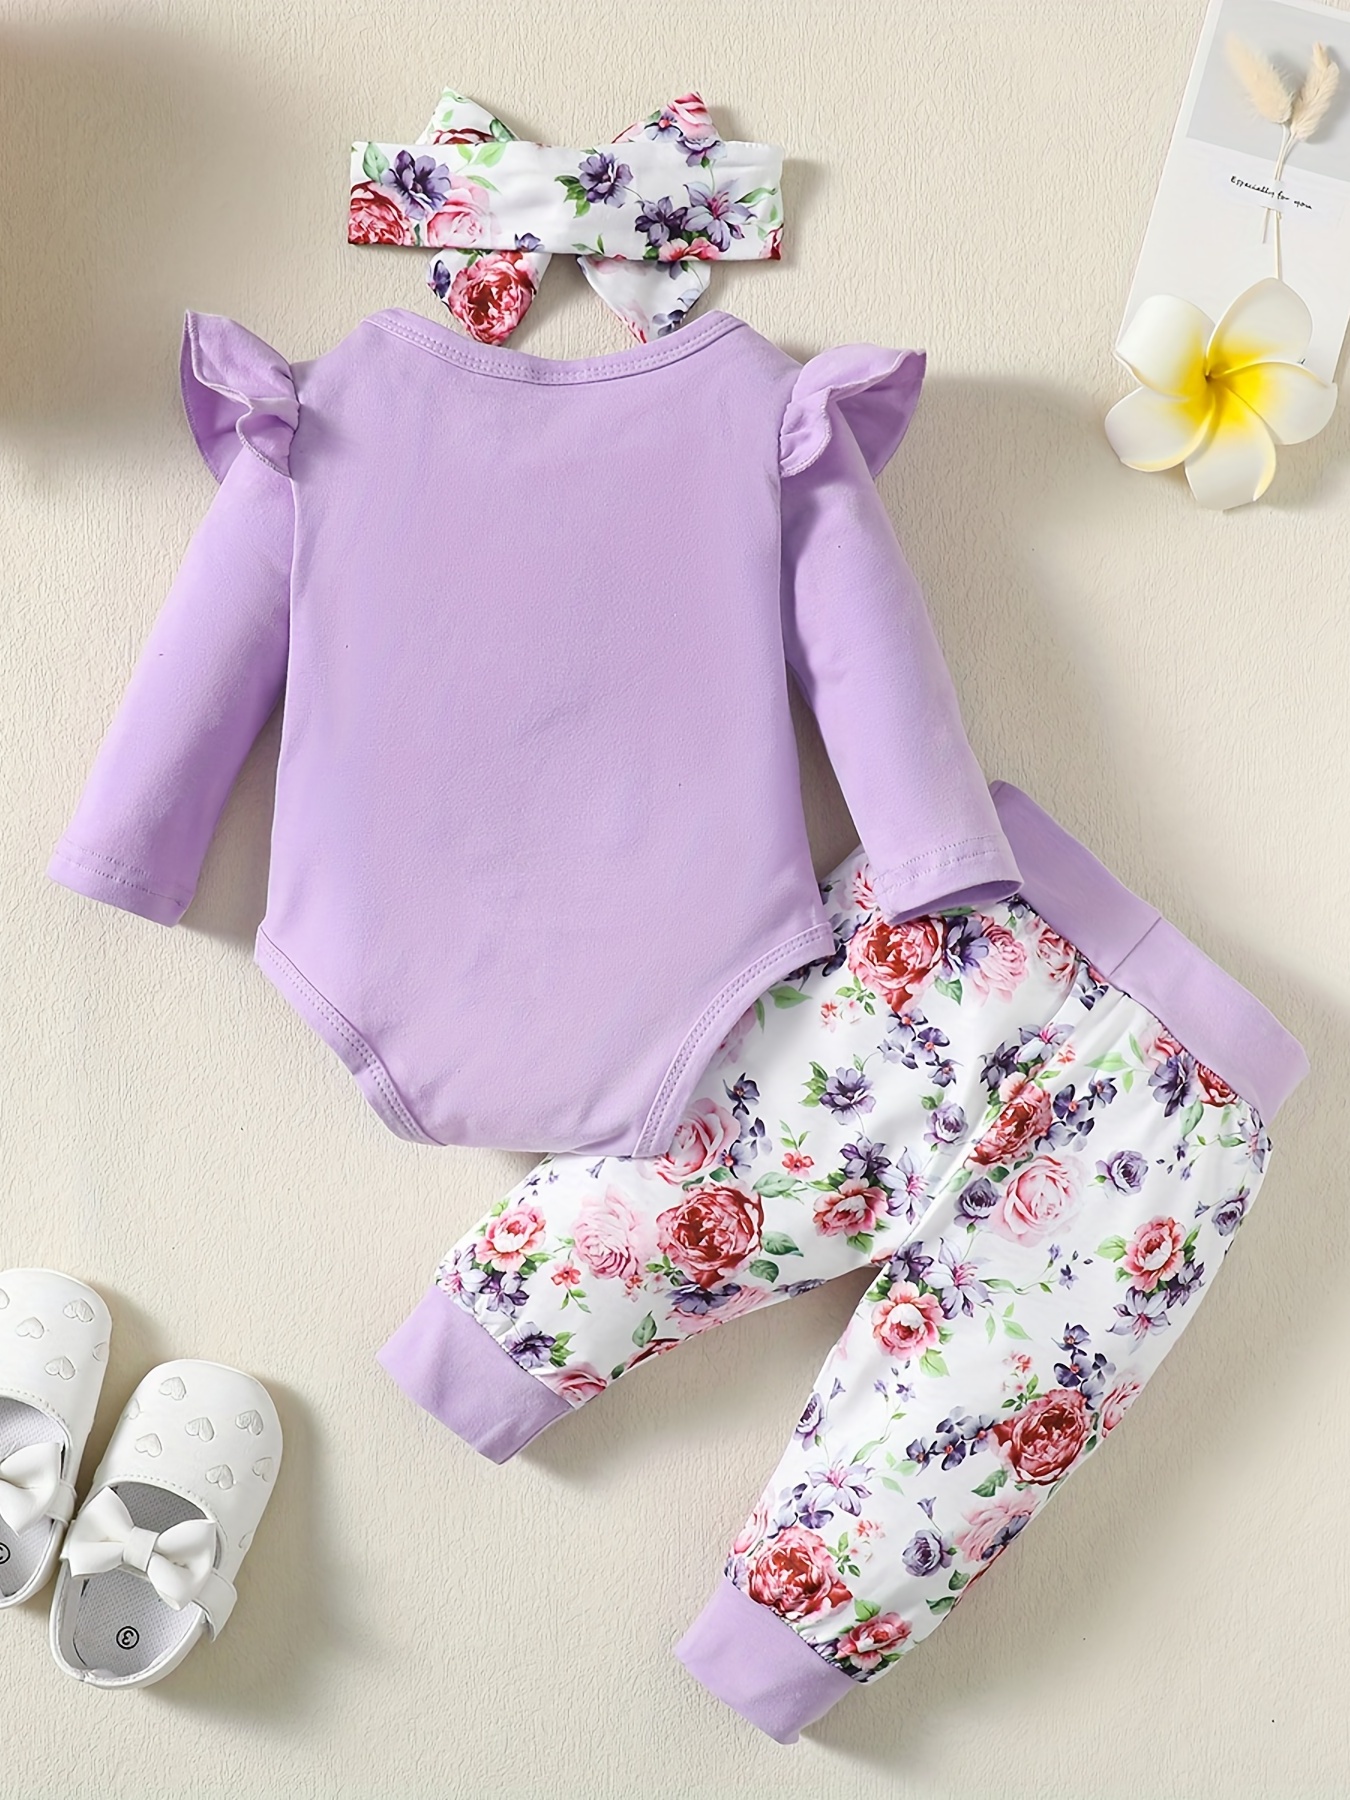 Baby Girls' Clothes